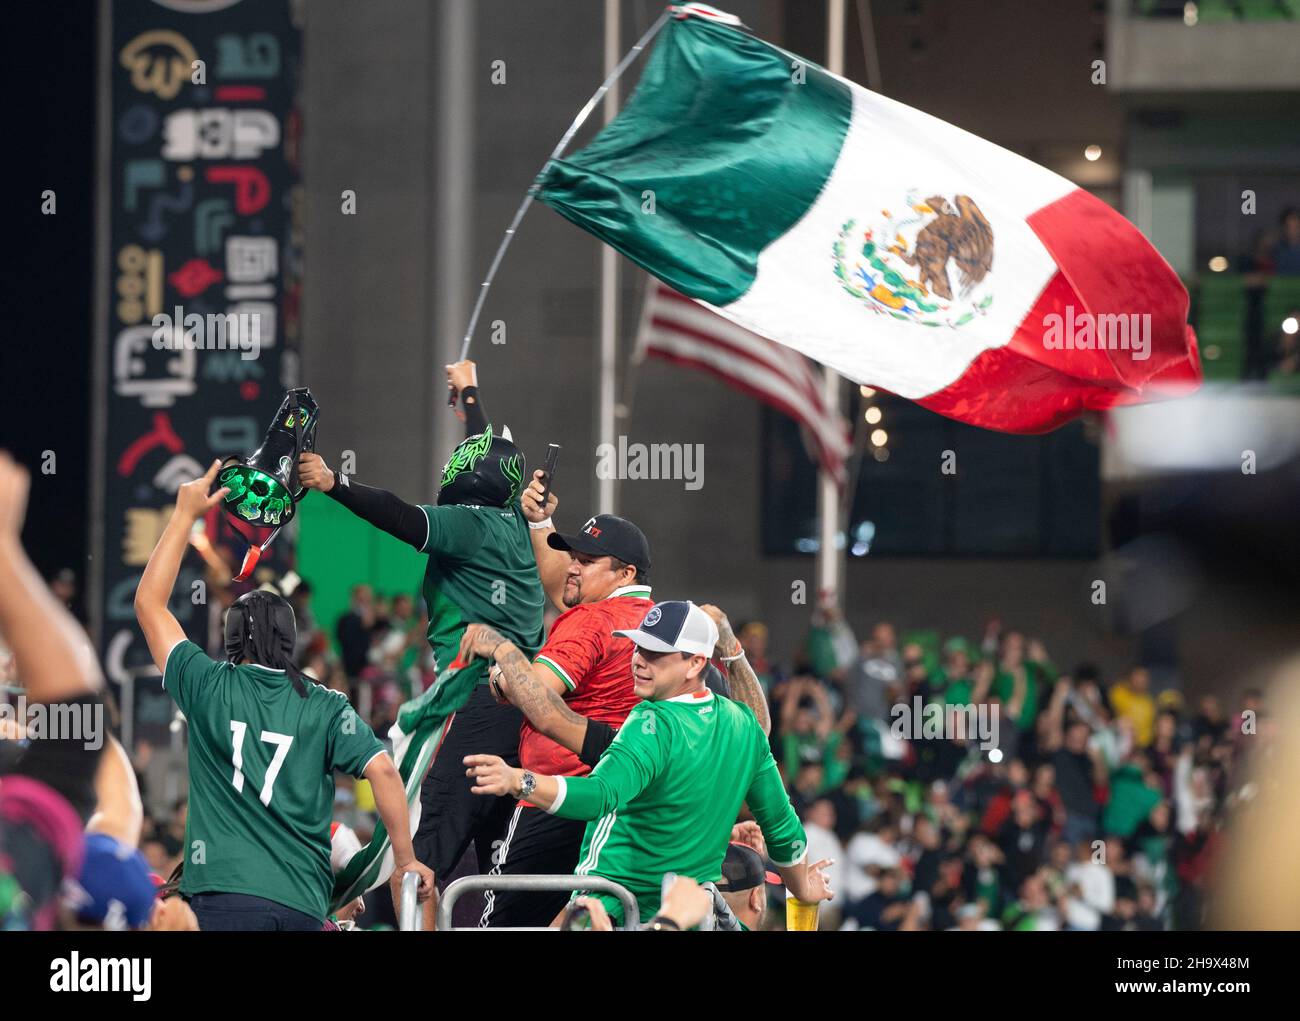 Austin, Texas, USA. 8th December, 2021. Mexico fans cheer a second half goal in a Mexico National Team vs. Chile friendly at Austin's Q2 Stadium. The teams were tied, 2-2 after regulation play. Credit: Bob Daemmrich/Alamy Live News Stock Photo